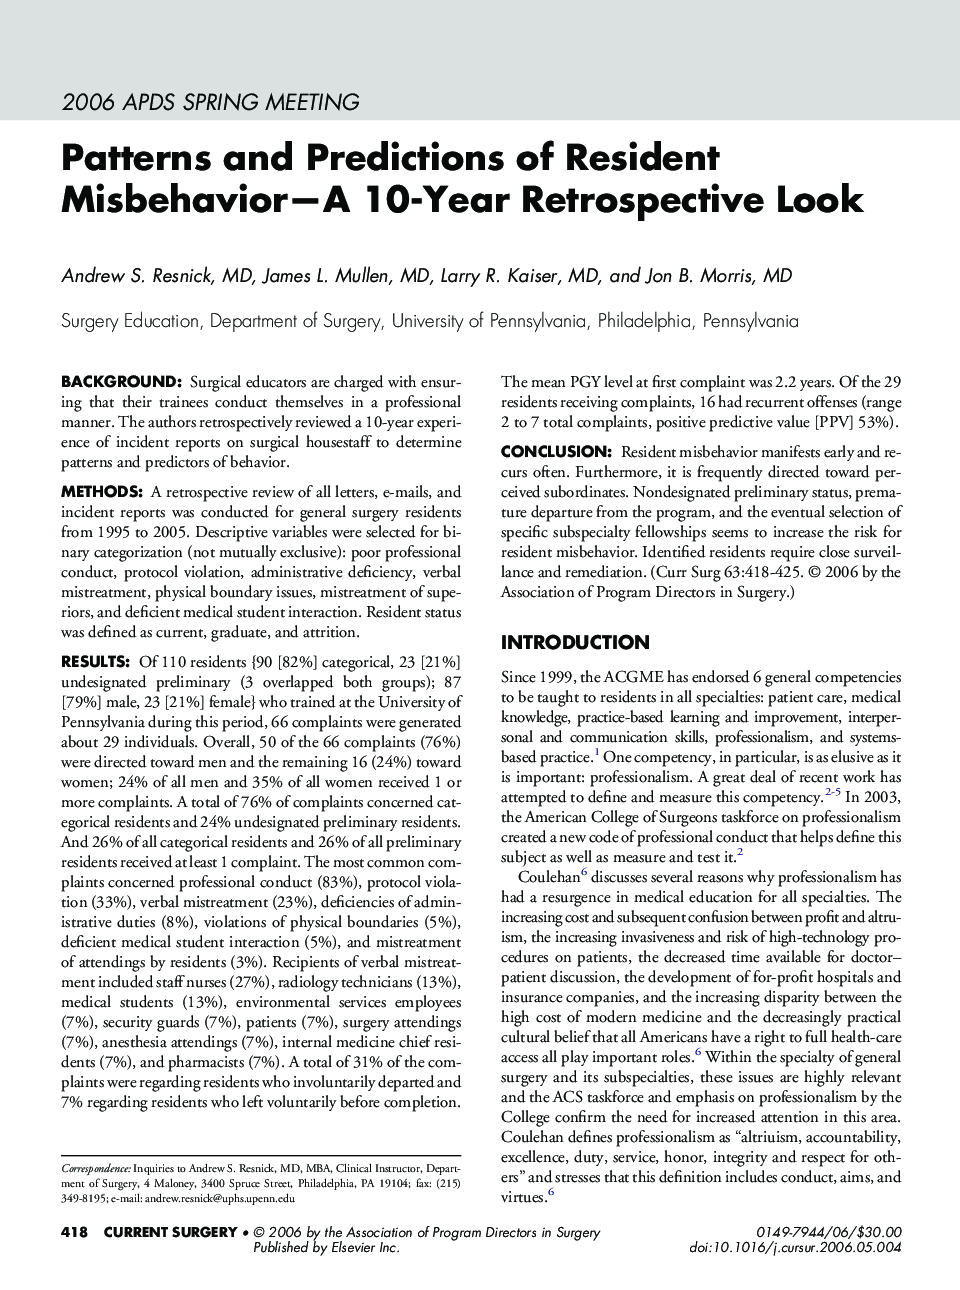 Patterns and Predictions of Resident Misbehavior—A 10-Year Retrospective Look